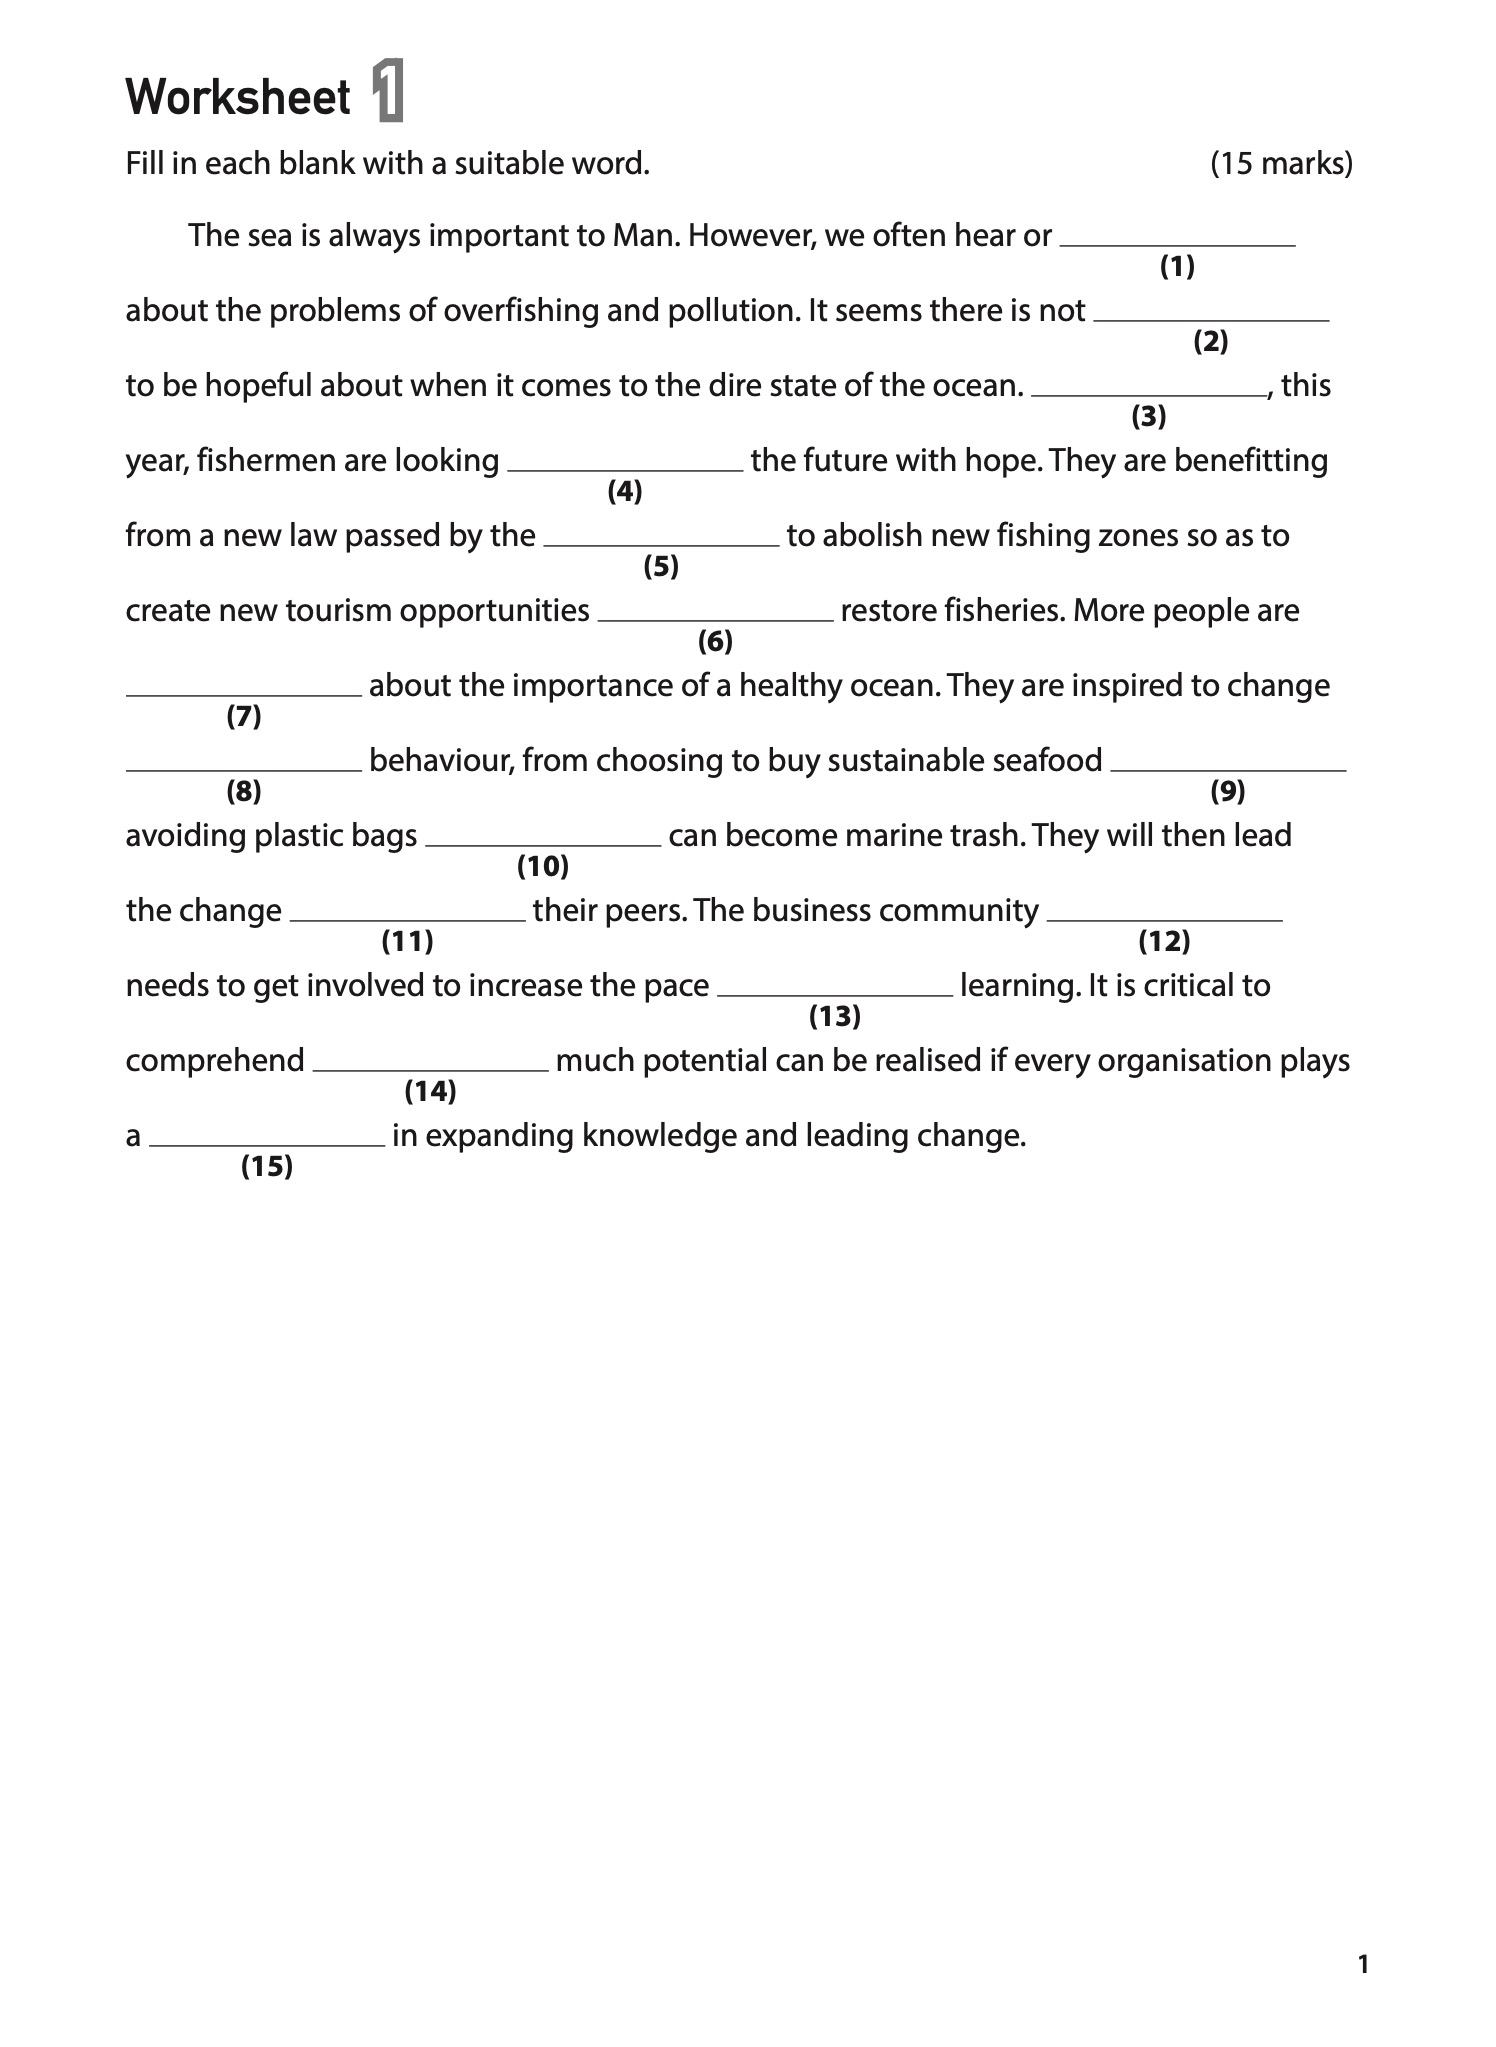 100-english-worksheets-primary-5-6-comprehension-cloze-cpd